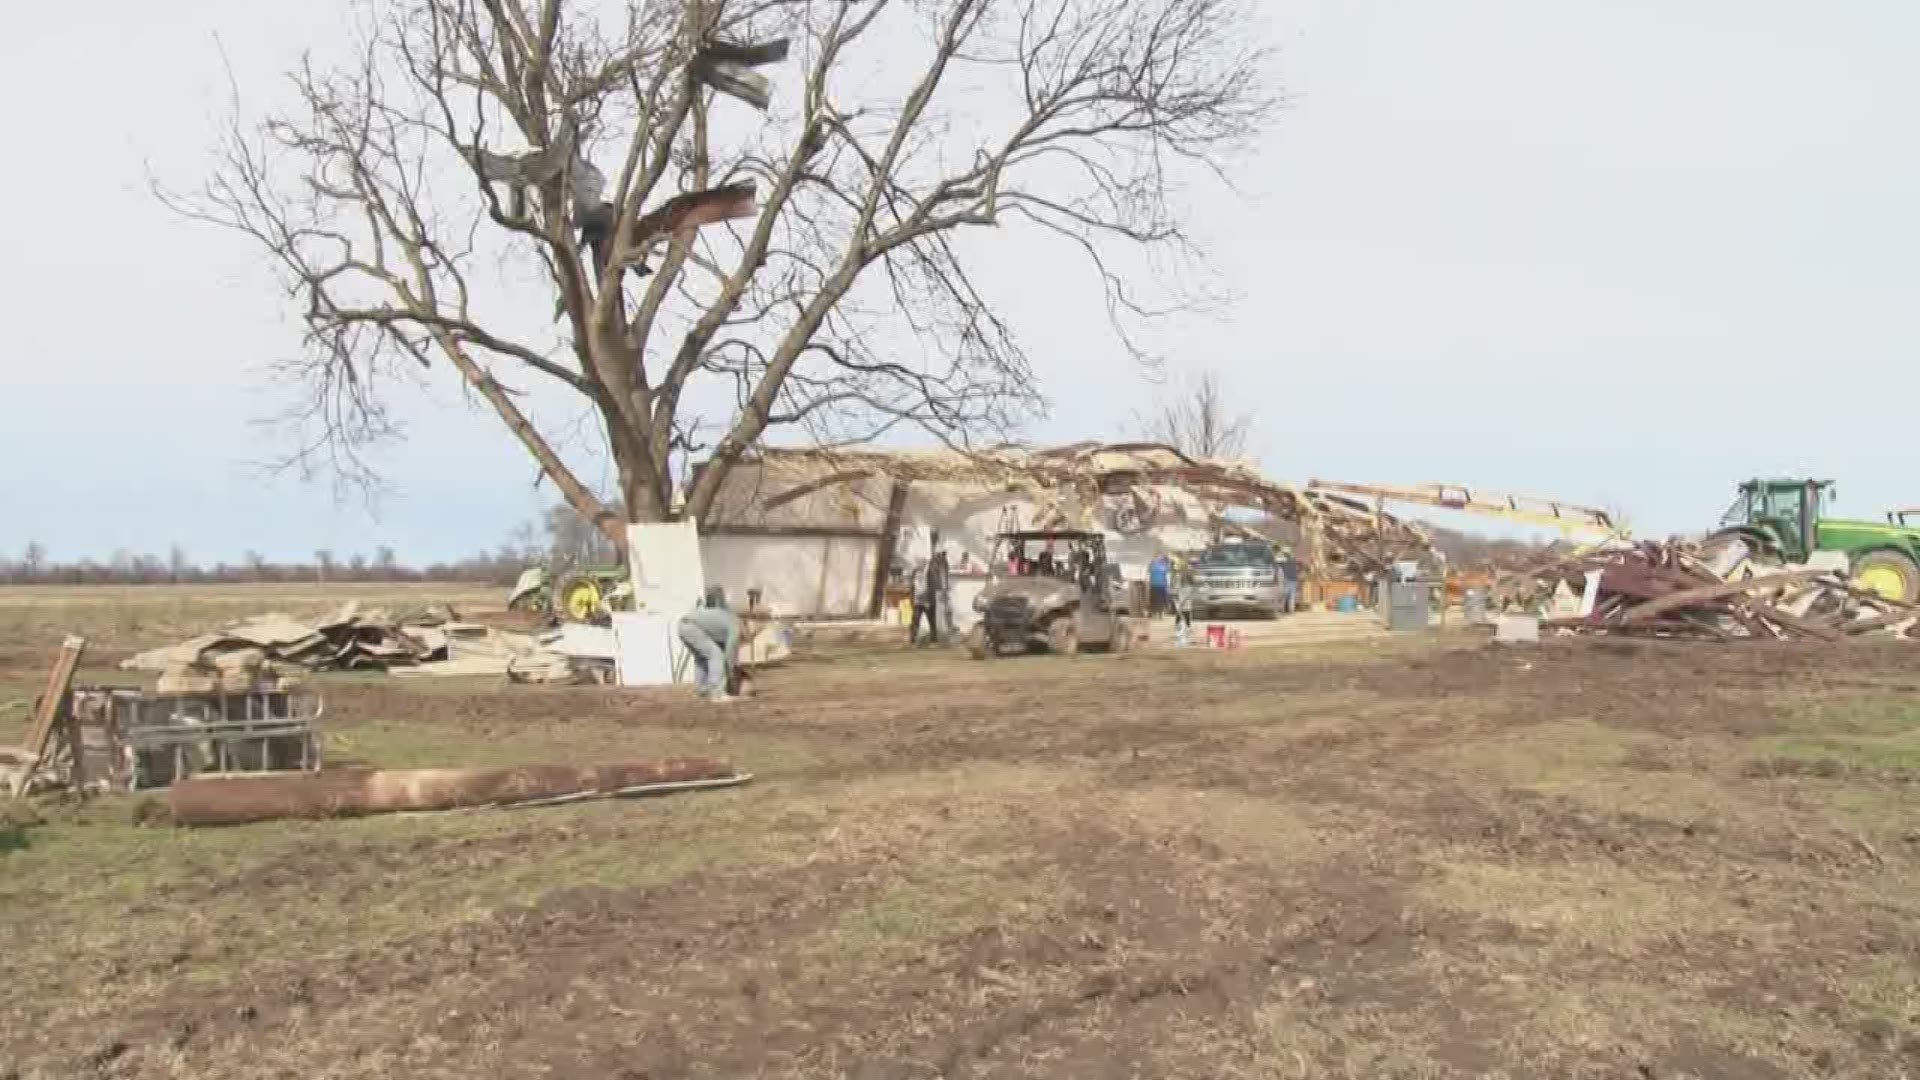 One tornado left a line of destruction from Lonoke county to prairie county taking out several buildings.